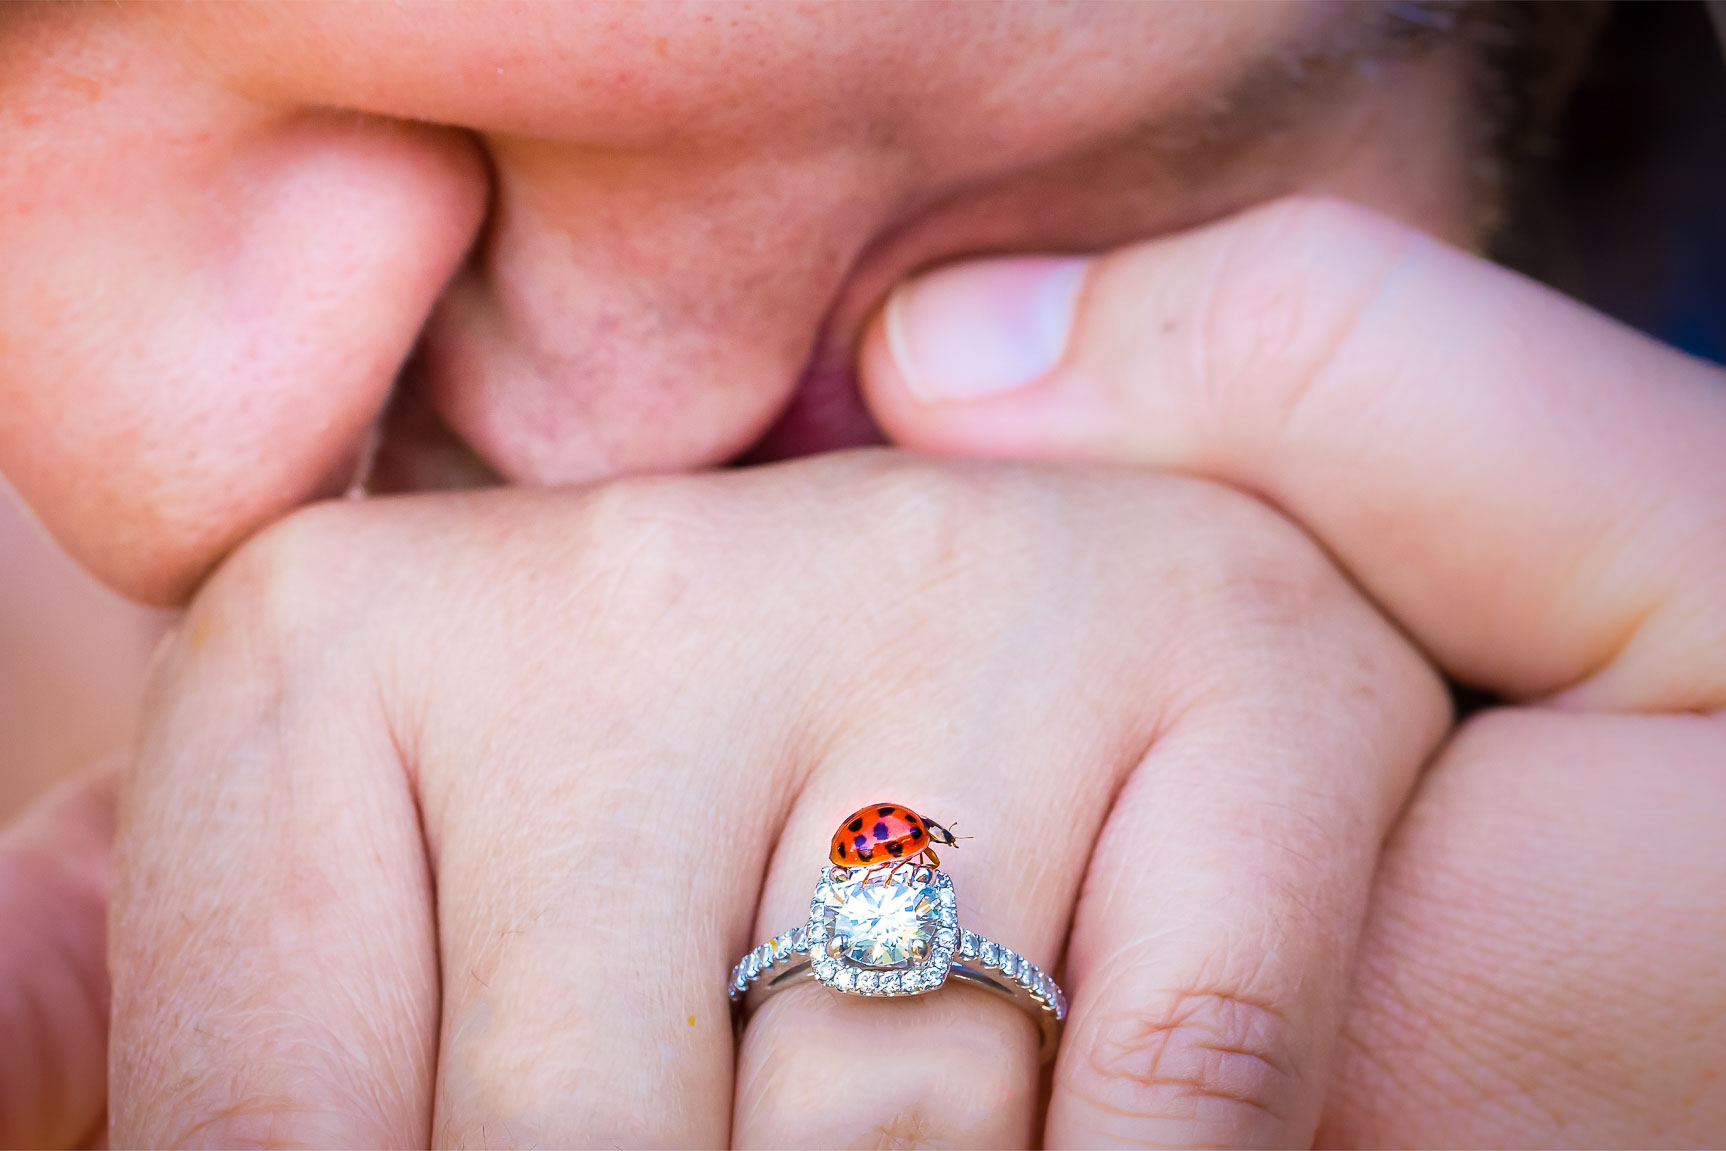 Creative Wedding Photographer, Lisa Rhinehart, captures this image of a ladybug on the bride's ring as the groom kisses her hand during their wedding 